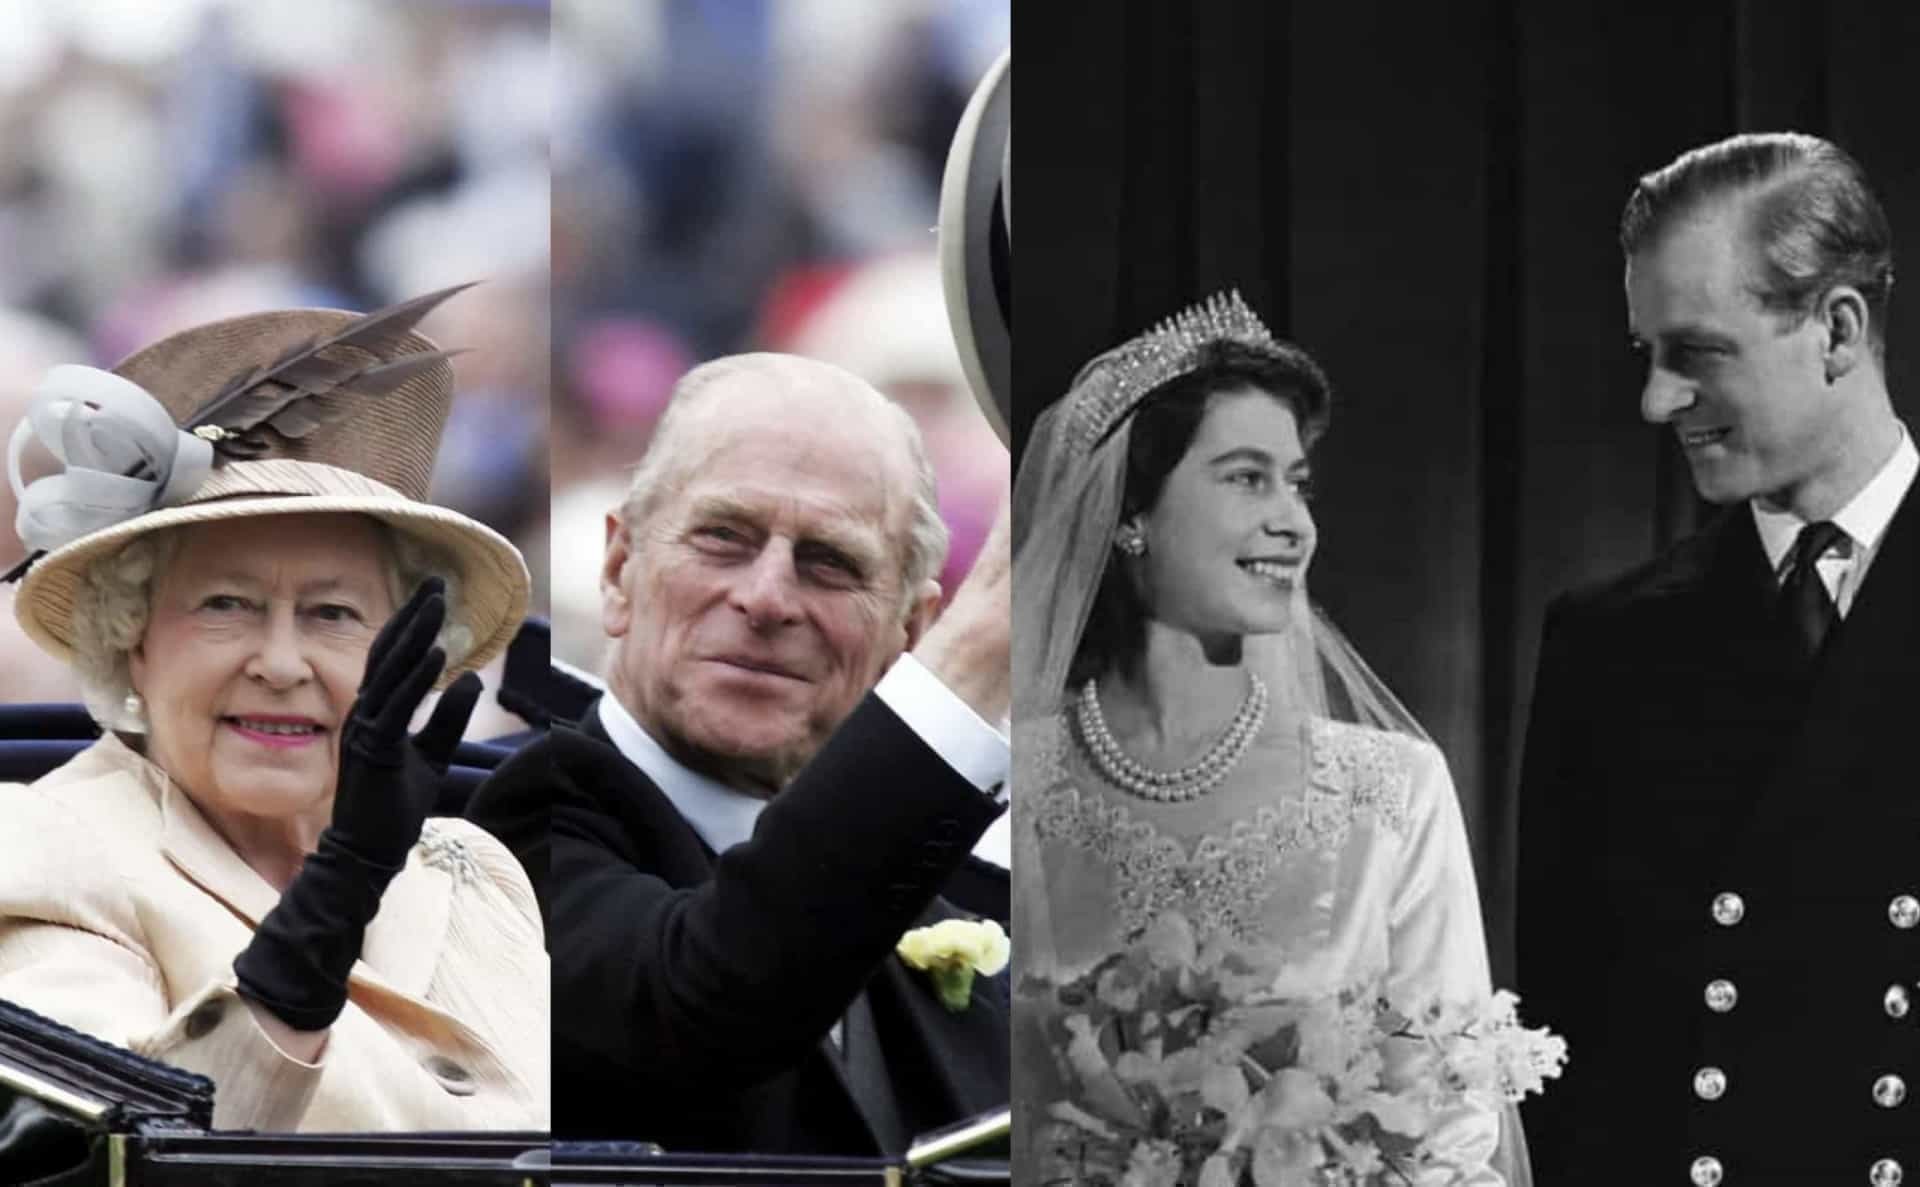 <p>The marriage of Queen Elizabeth II and Prince Philip, Duke of Edinburgh was the longest <a href="https://www.starsinsider.com/lifestyle/450359/the-royal-weddings-that-changed-european-history" rel="noopener">royal marriage</a> in British history. But when Princess Elizabeth married Prince Philip of Greece and Denmark on November 20, 1947, she likely didn't expect it to endure for over 70 years, along with her record-breaking reign. </p> <p>Sadly, Prince Philip passed away in April 2021 at the age of 99, and Queen Elizabeth joined him on September 8, 2022, after a year of ill health following his death. Nonetheless, it was a beautiful journey. Browse this gallery and take a look back at this most endearing of royal love stories.</p><p>You may also like:<a href="https://www.starsinsider.com/n/185058?utm_source=msn.com&utm_medium=display&utm_campaign=referral_description&utm_content=202921v11en-nz"> Actors who've been victims of the Oscar curse</a></p>